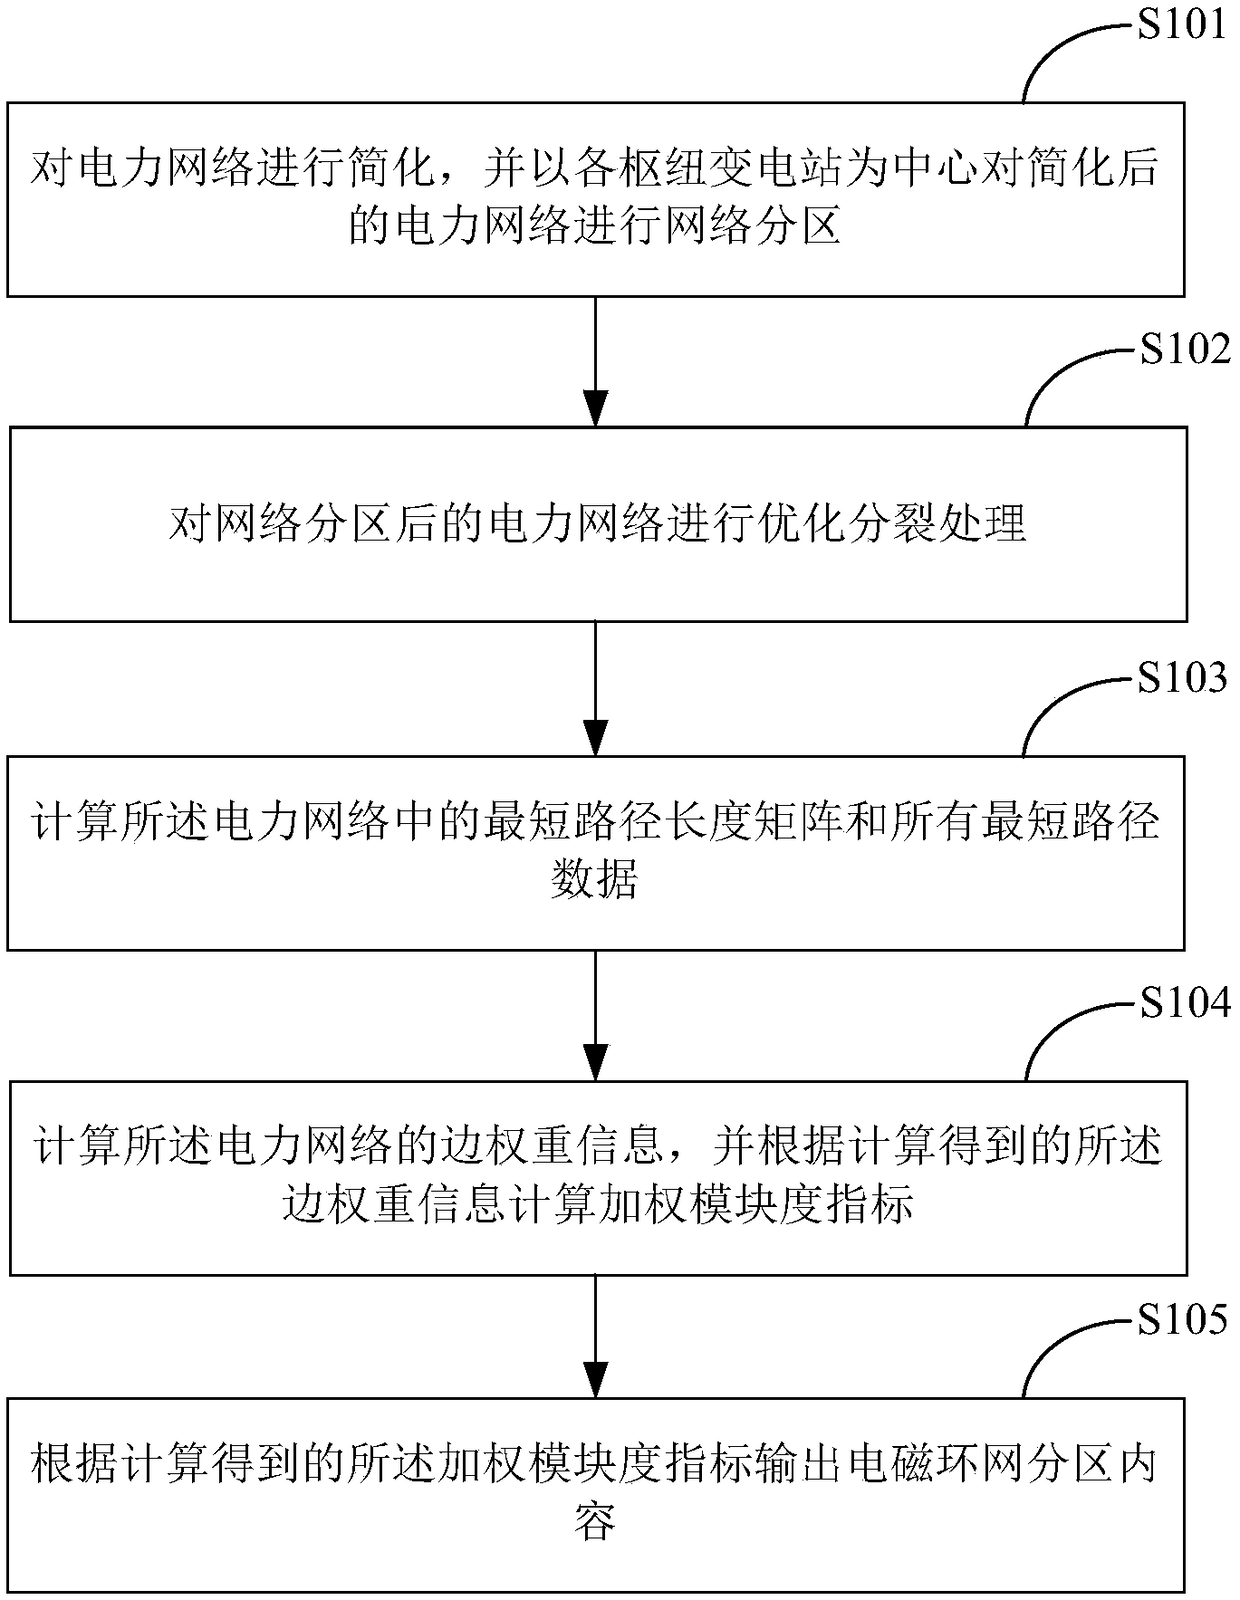 Power network partitioning method based on network structure characteristic analysis